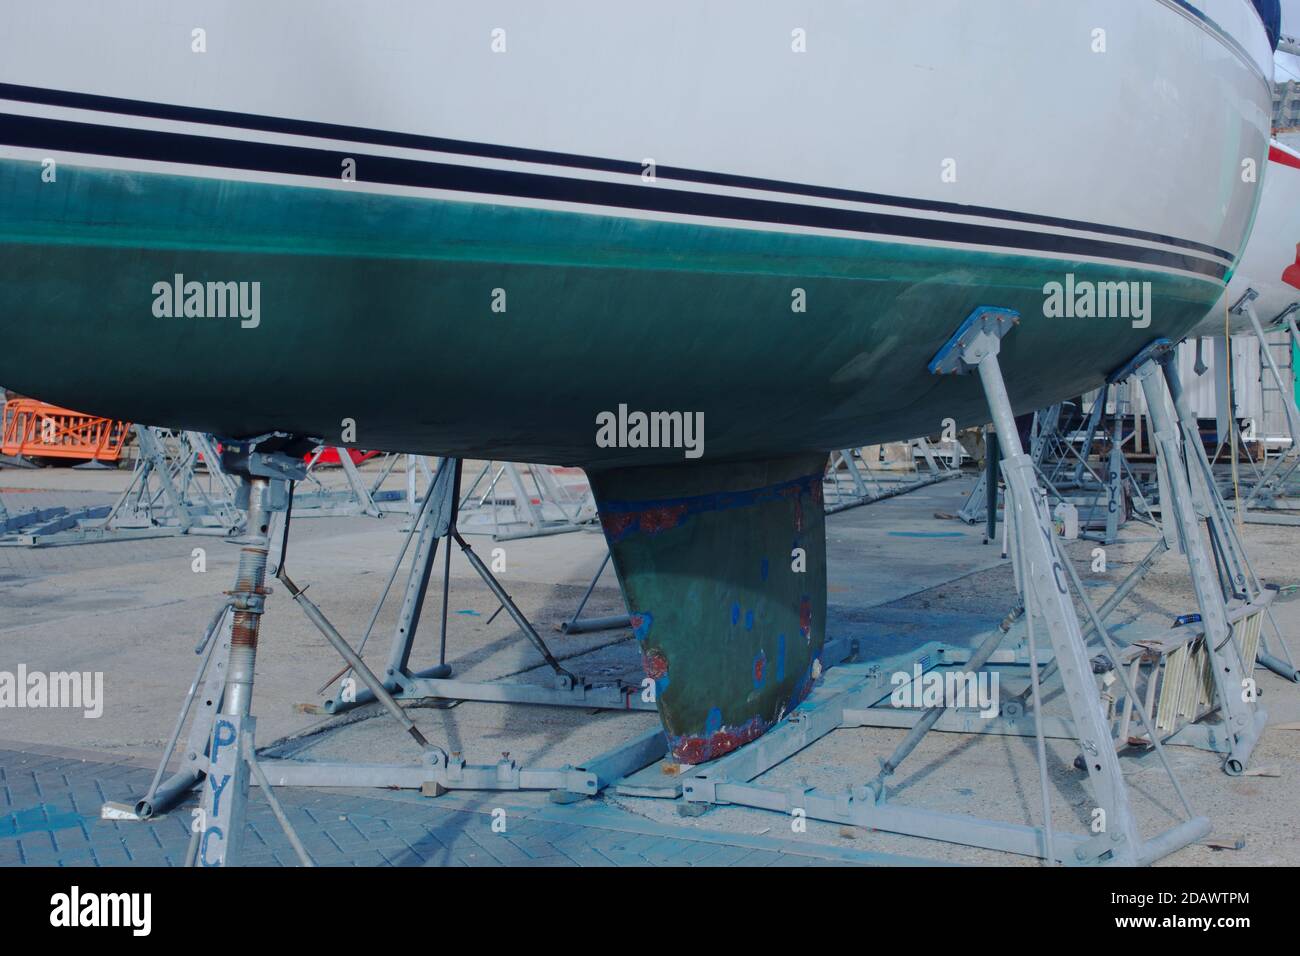 A sailing yacht or boat on the hard in a boatyard, with hull showing a green coloured anti-fouling layer to slow the growth of subaquatic organisms. Stock Photo